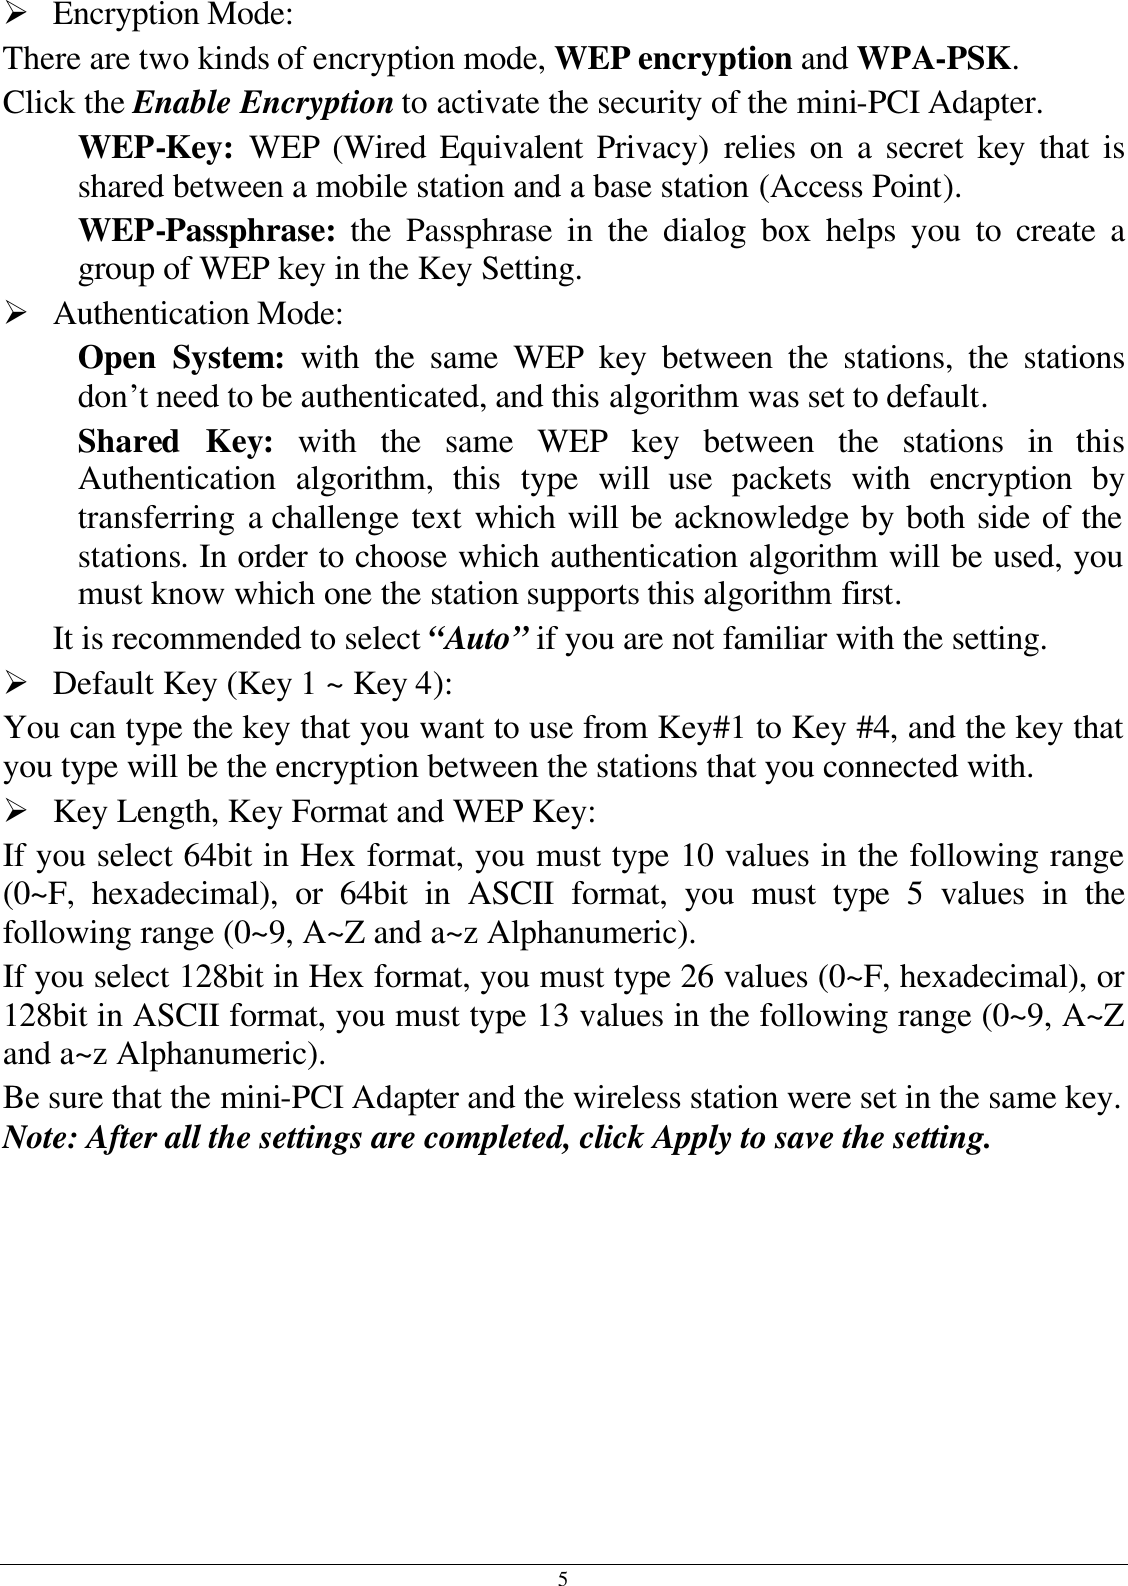 5 Ø Encryption Mode:  There are two kinds of encryption mode, WEP encryption and WPA-PSK. Click the Enable Encryption to activate the security of the mini-PCI Adapter. WEP-Key:  WEP (Wired Equivalent Privacy) relies on a secret key that is shared between a mobile station and a base station (Access Point). WEP-Passphrase: the Passphrase in the dialog box helps you to create a group of WEP key in the Key Setting. Ø Authentication Mode:  Open System: with the same WEP key between the stations, the stations don’t need to be authenticated, and this algorithm was set to default. Shared Key: with the same WEP key between the stations in this Authentication algorithm, this type will use packets with encryption by transferring a challenge text which will be acknowledge by both side of the stations. In order to choose which authentication algorithm will be used, you must know which one the station supports this algorithm first. It is recommended to select “Auto” if you are not familiar with the setting. Ø Default Key (Key 1 ~ Key 4):  You can type the key that you want to use from Key#1 to Key #4, and the key that you type will be the encryption between the stations that you connected with.  Ø Key Length, Key Format and WEP Key: If you select 64bit in Hex format, you must type 10 values in the following range (0~F, hexadecimal), or 64bit in ASCII format, you must type 5 values in the following range (0~9, A~Z and a~z Alphanumeric).  If you select 128bit in Hex format, you must type 26 values (0~F, hexadecimal), or 128bit in ASCII format, you must type 13 values in the following range (0~9, A~Z and a~z Alphanumeric). Be sure that the mini-PCI Adapter and the wireless station were set in the same key. Note: After all the settings are completed, click Apply to save the setting. 